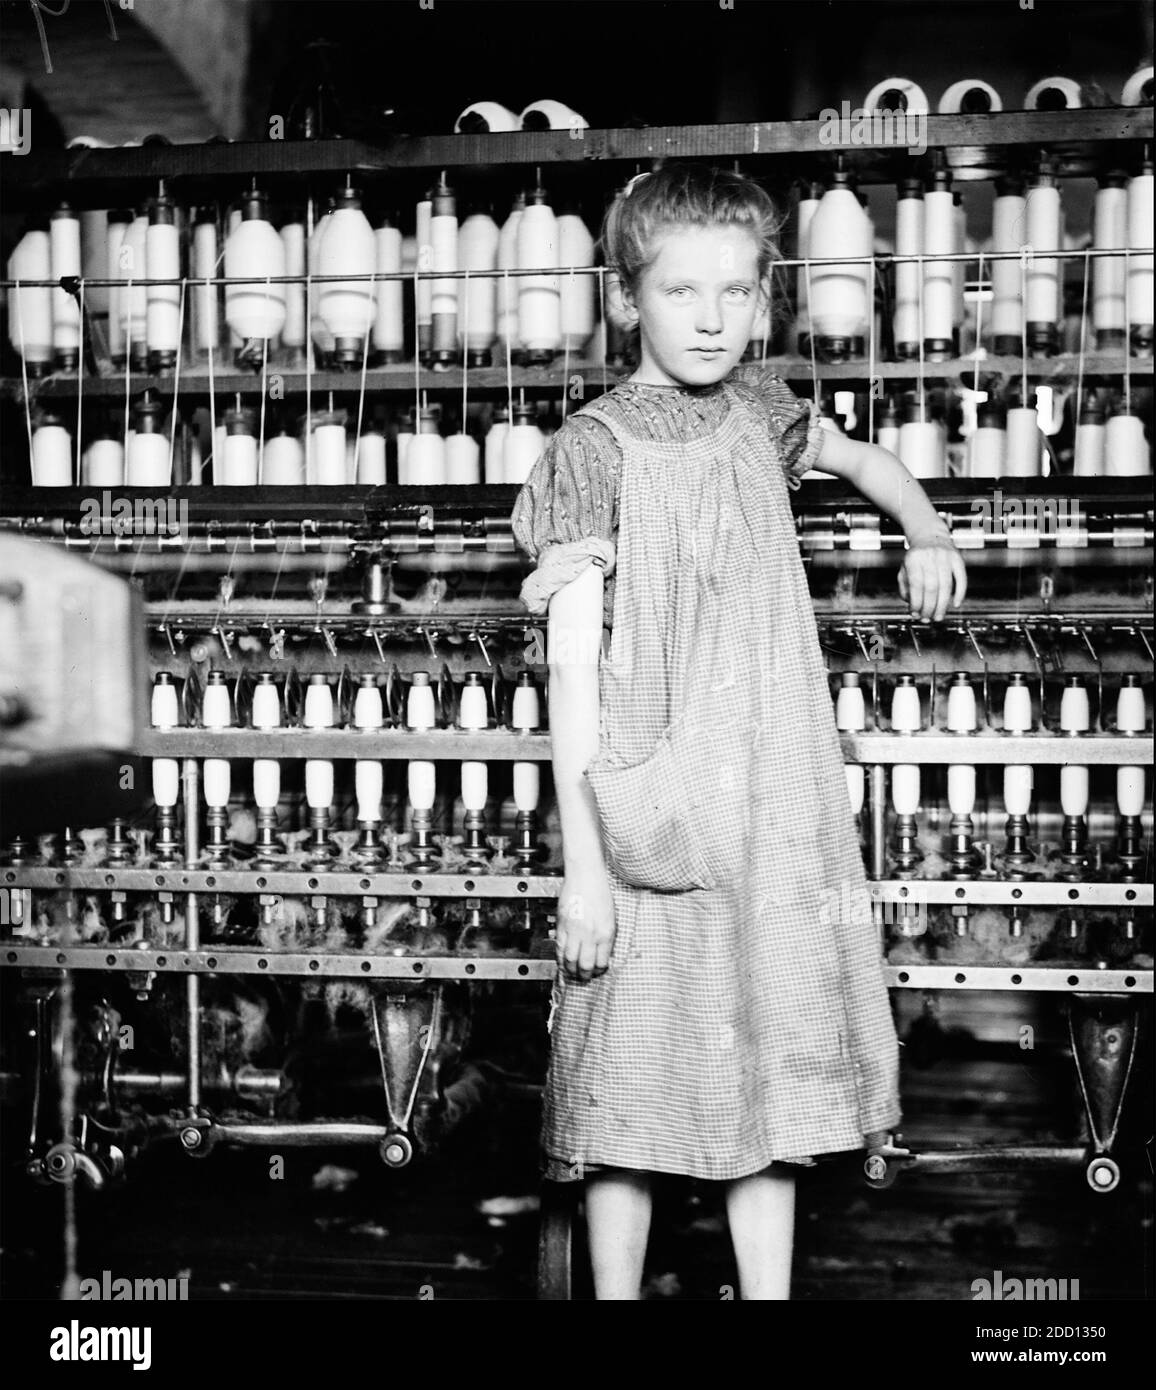 LEWIS HINE (1874-1940) American sociologist and photographer.  His caption reads 'Addie Card, 12 years. Spinner in North Pormal (mispselt Pownal), Cotton Mill,Vt' (Vermont) in 1910. Stock Photo